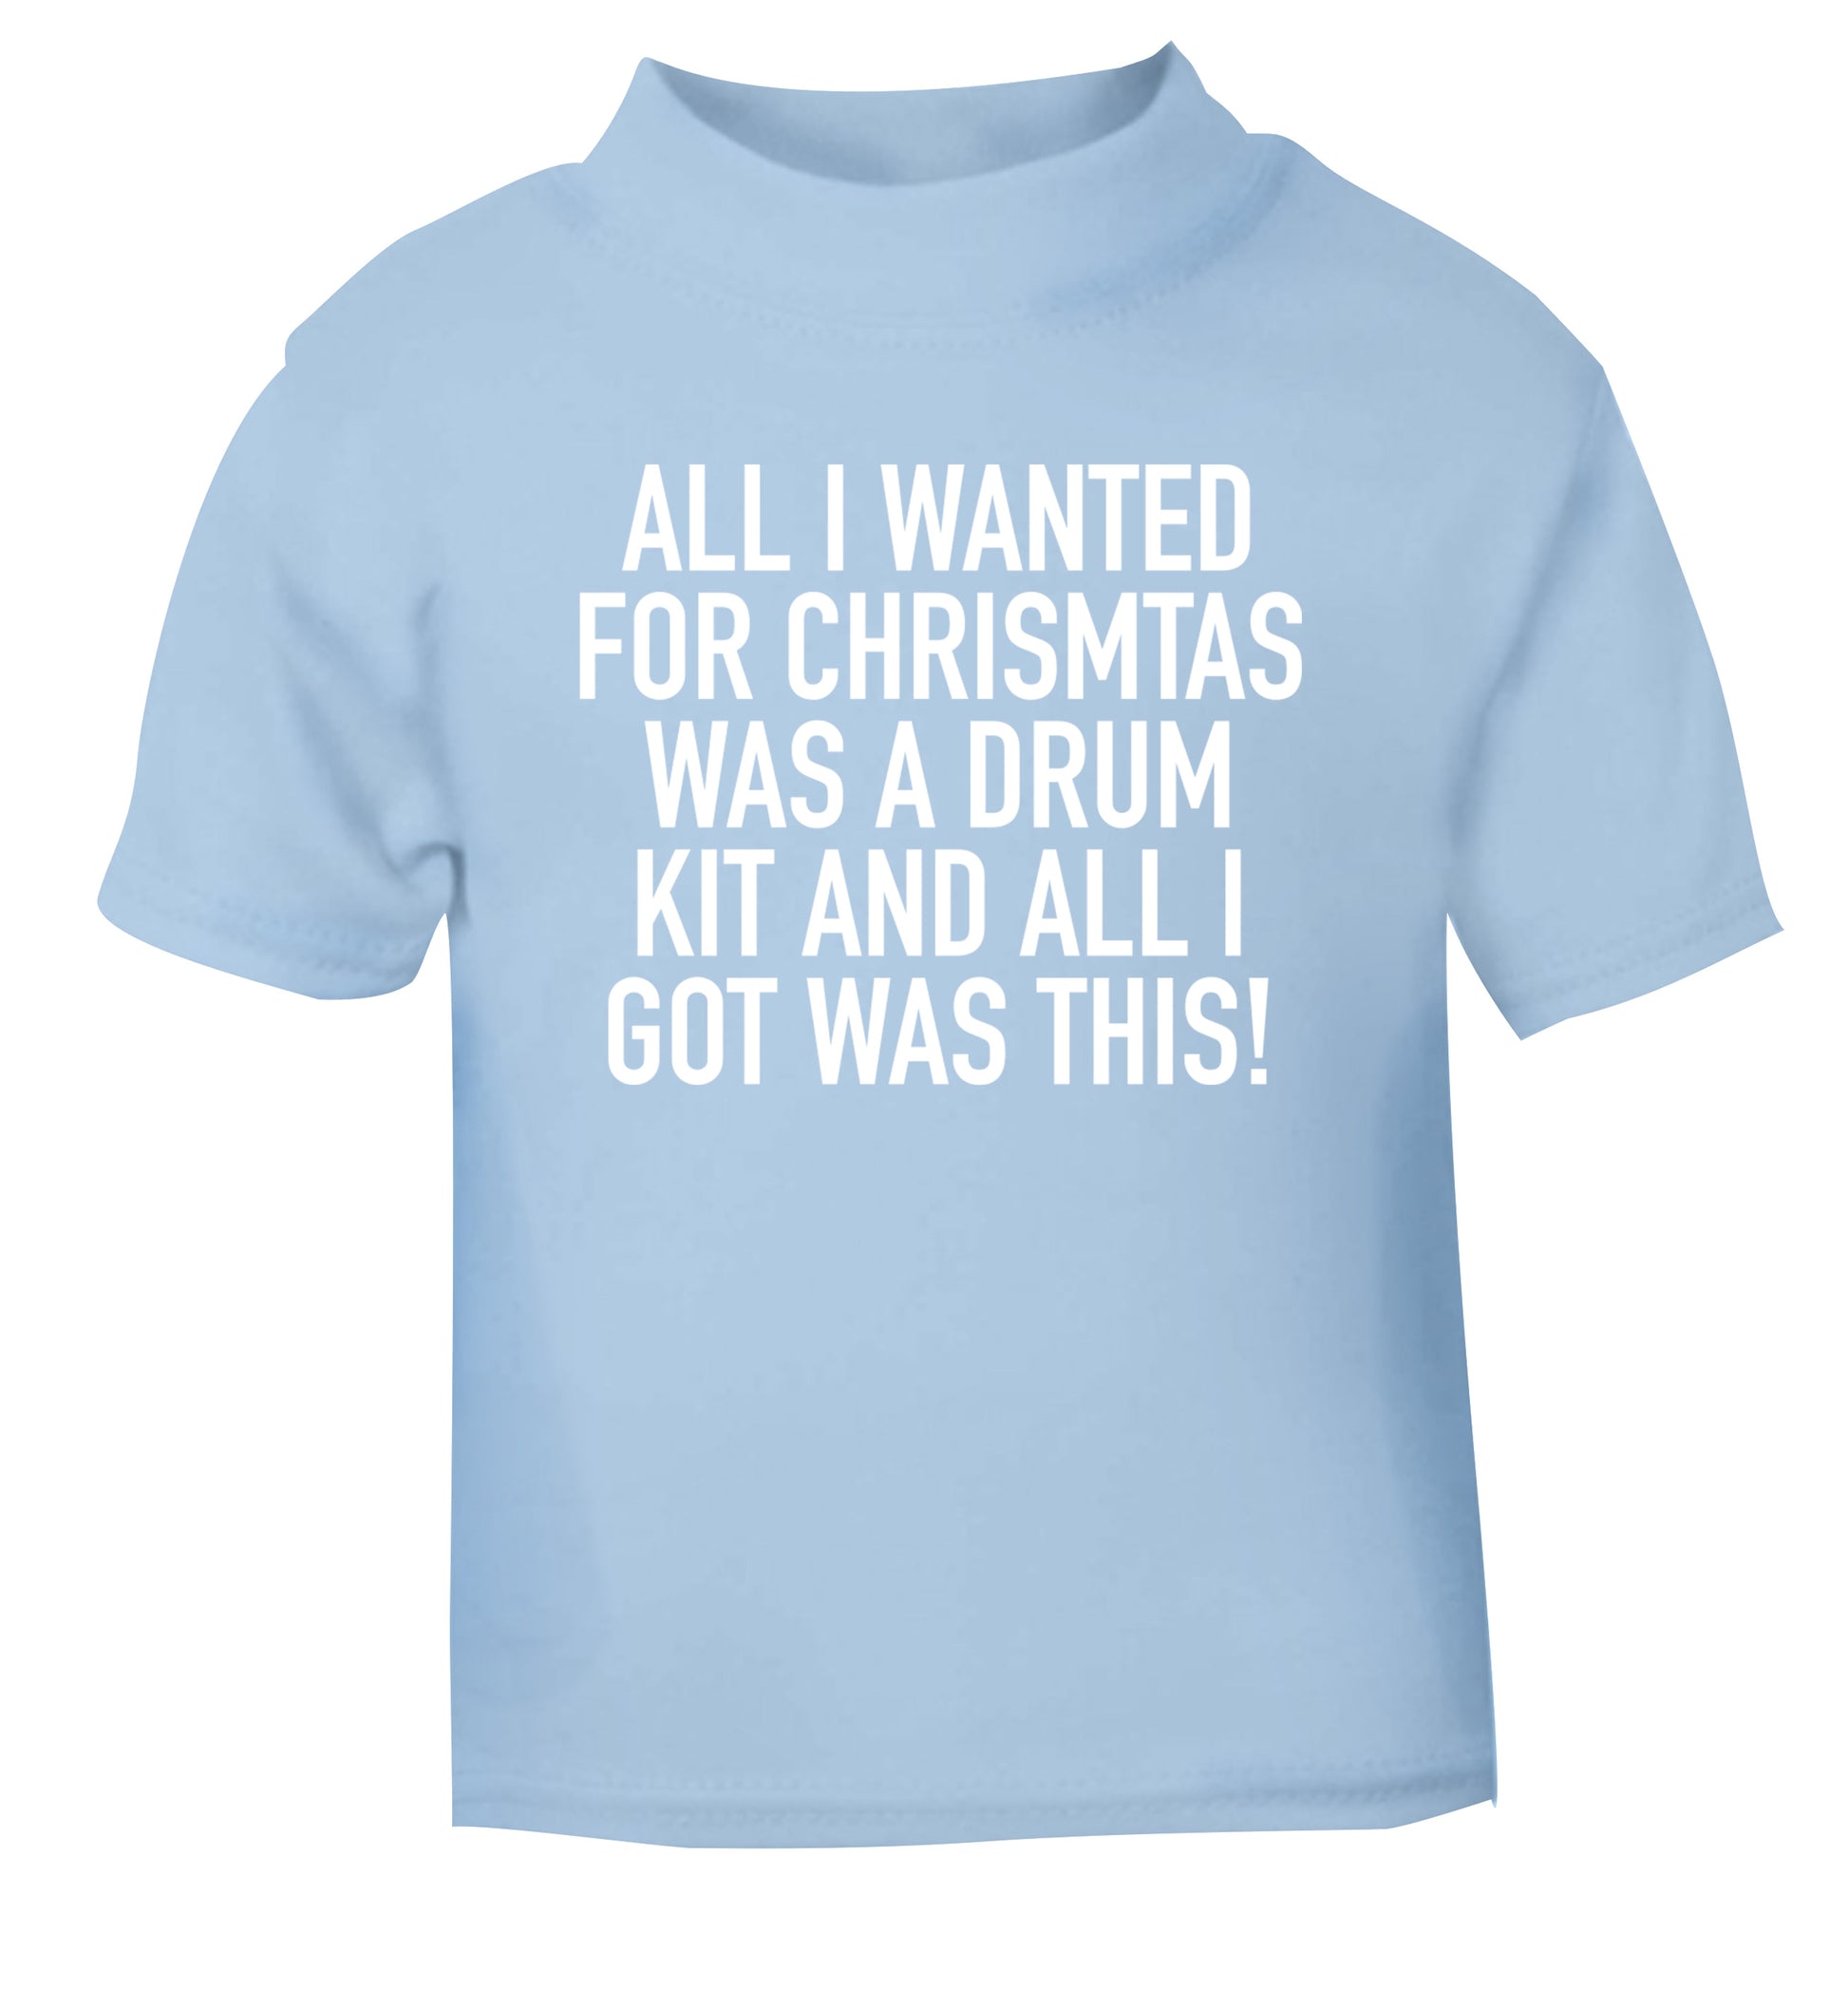 All I wanted for Christmas was a drum kit and all I got was this! light blue Baby Toddler Tshirt 2 Years